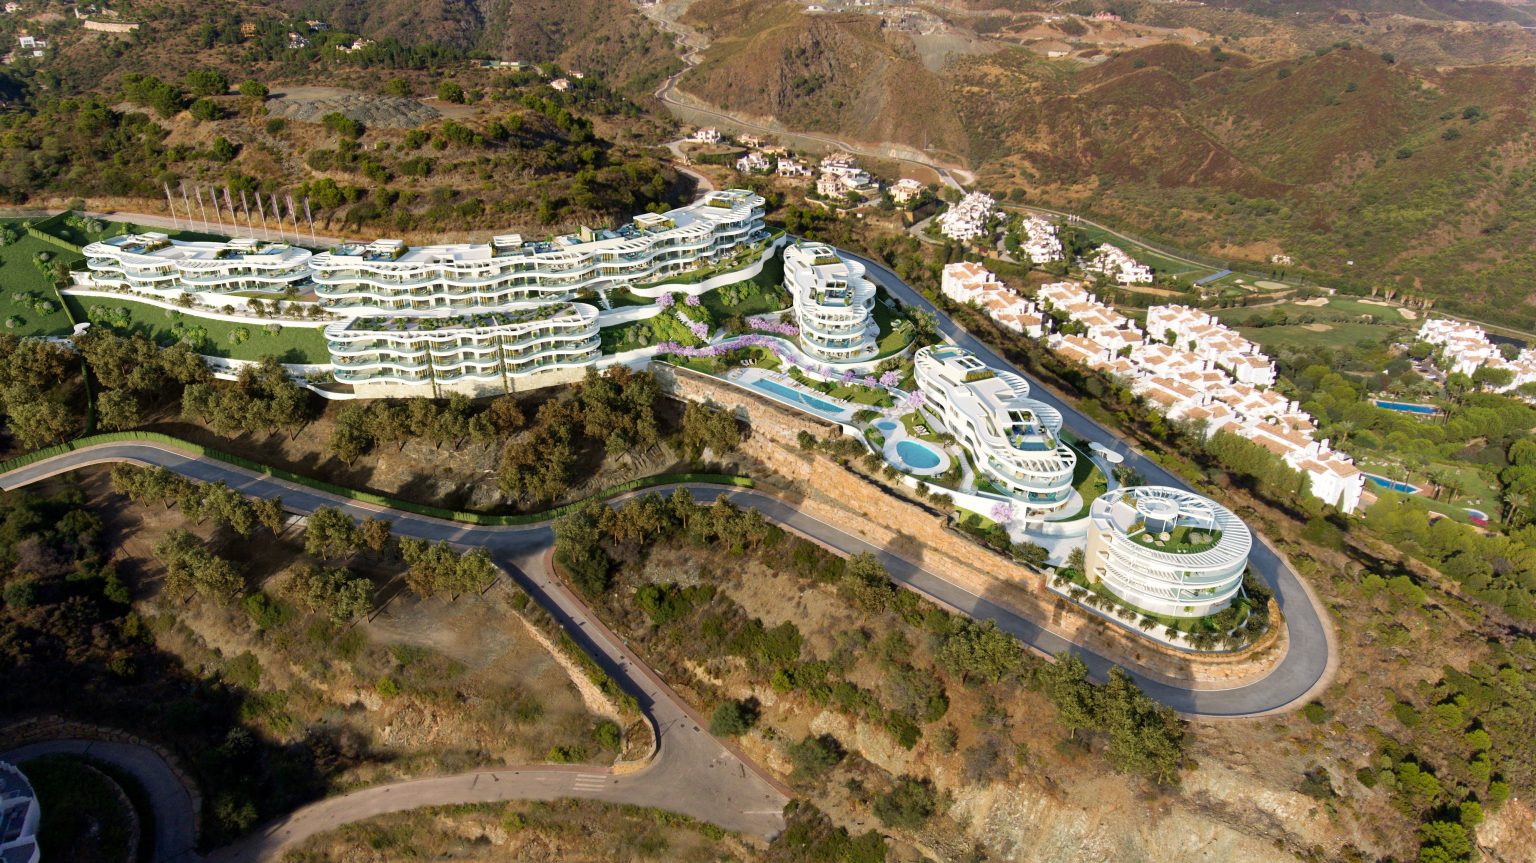 What concierge service can you expect at The View Marbella?